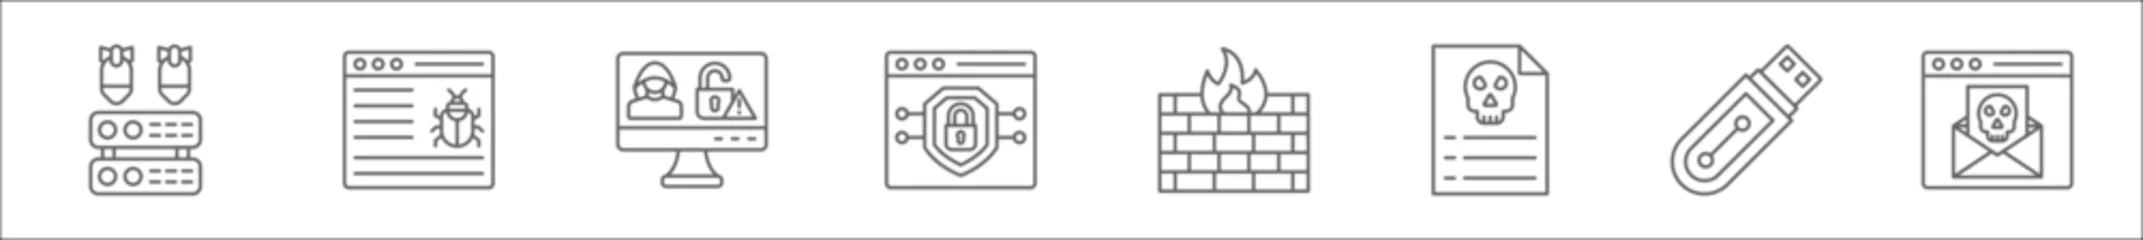 Poster outline set of cyber crime line icons. linear vector icons such as ddos, malware, cyber attack, vpn, firewall, file, pendrive, spam © Download for free